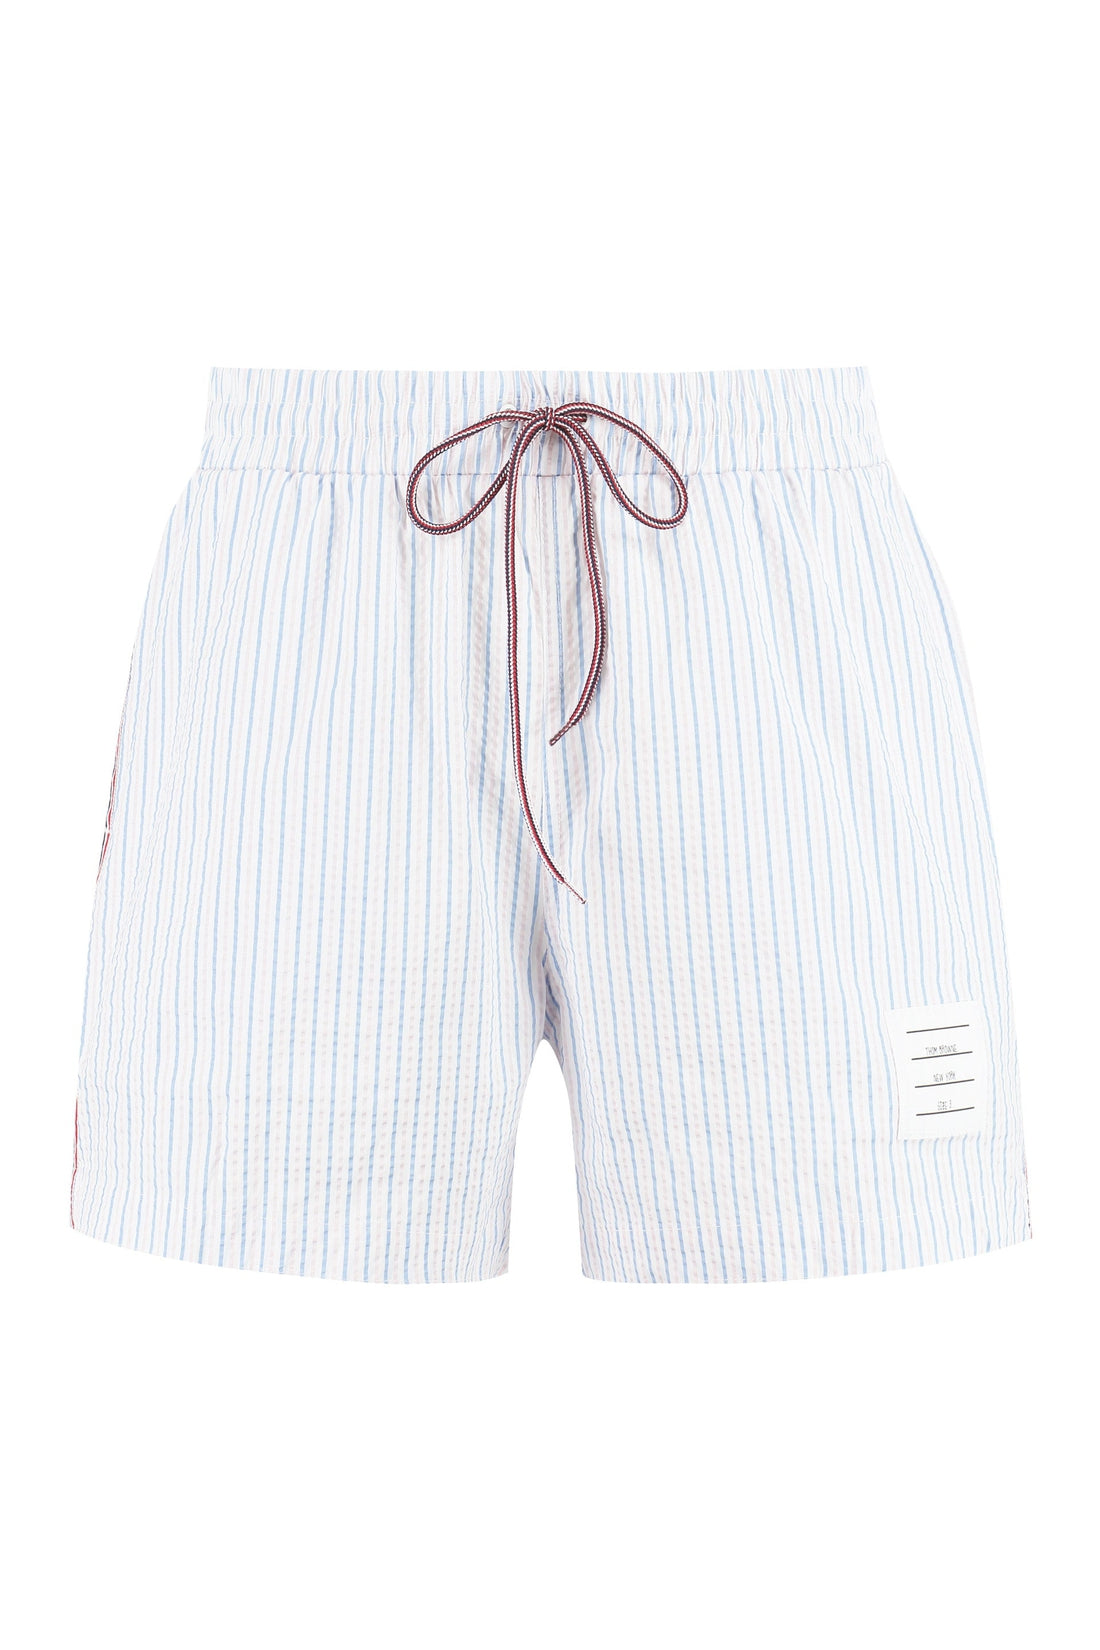 Thom Browne-OUTLET-SALE-Printed swim shorts-ARCHIVIST